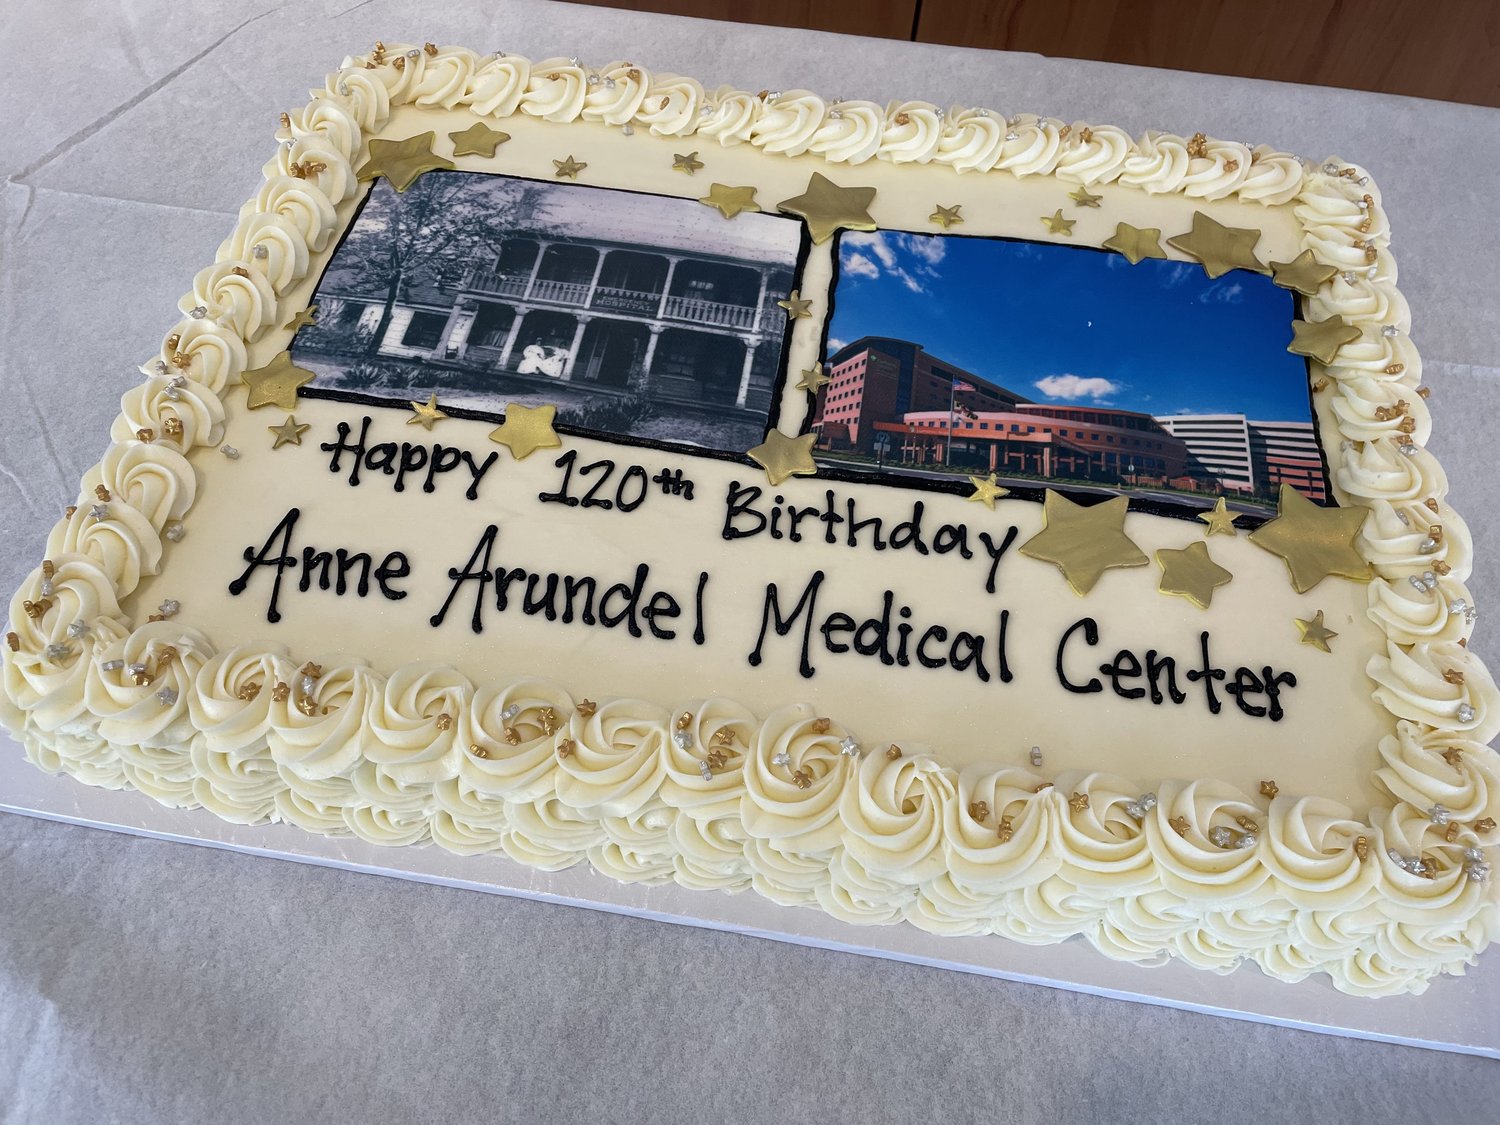 Hospital leaders and staff celebrated the major milestone with a special birthday cake for employees.